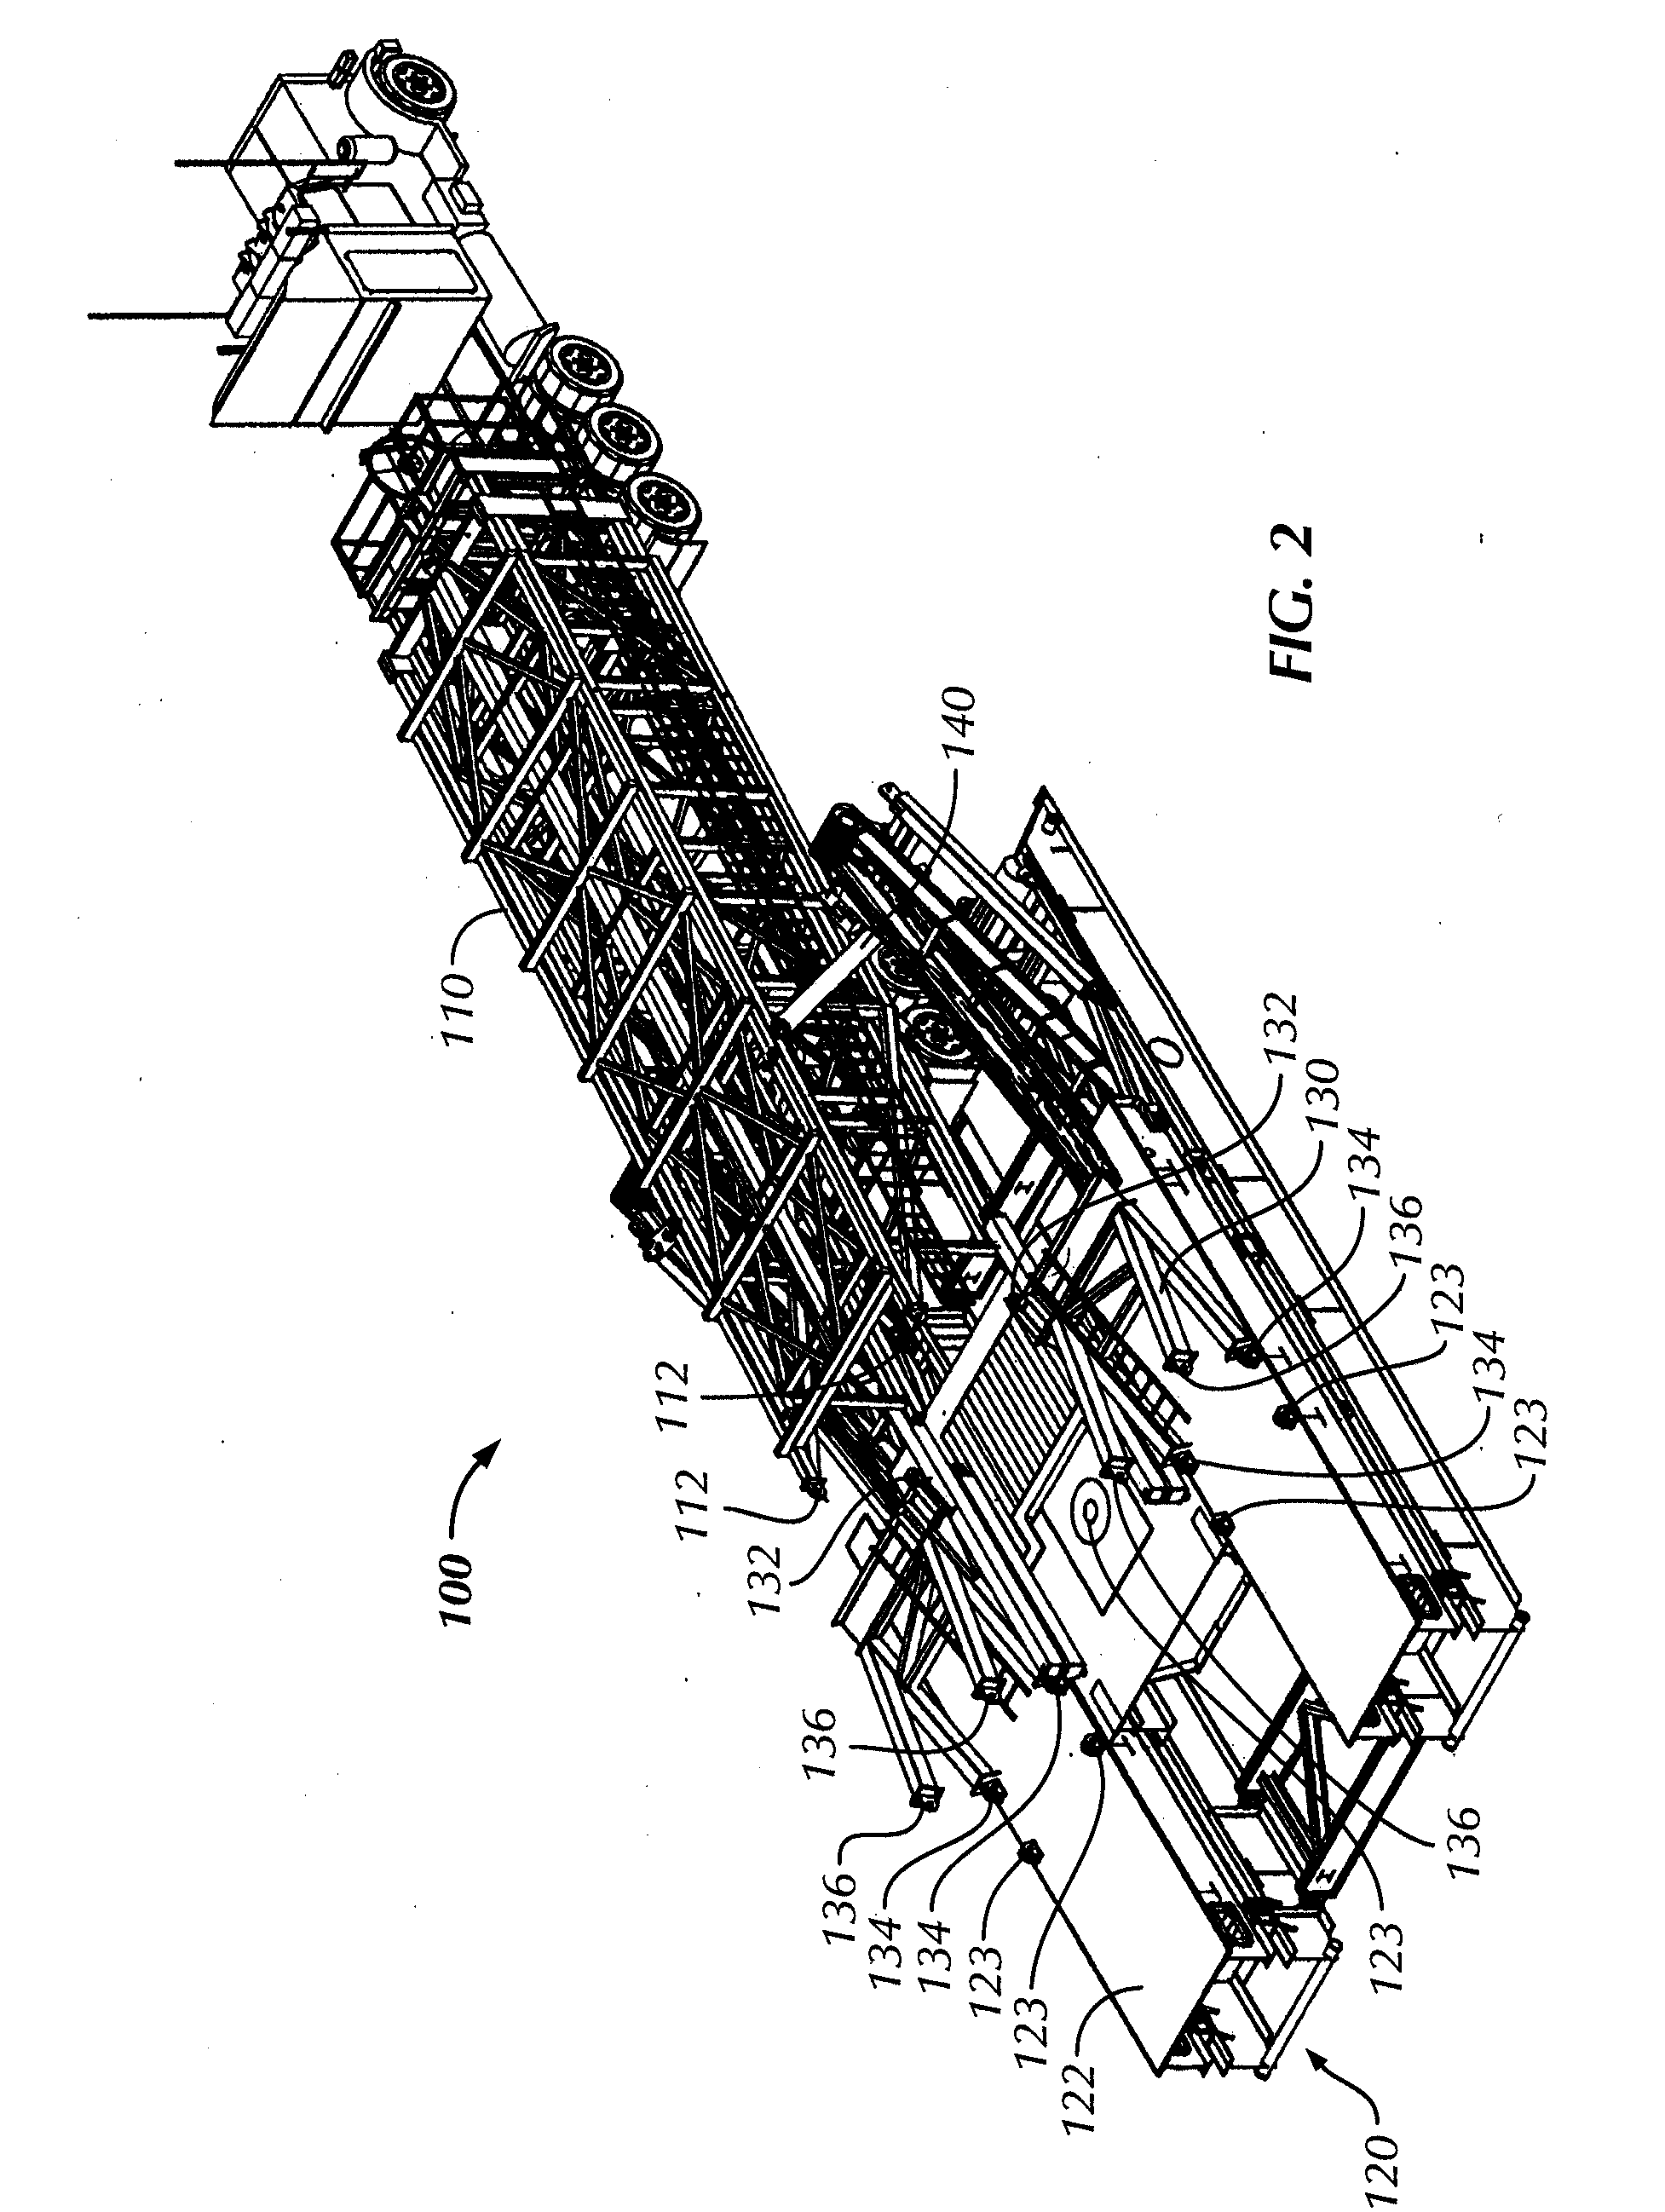 Portable drilling rig apparatus and assembly method